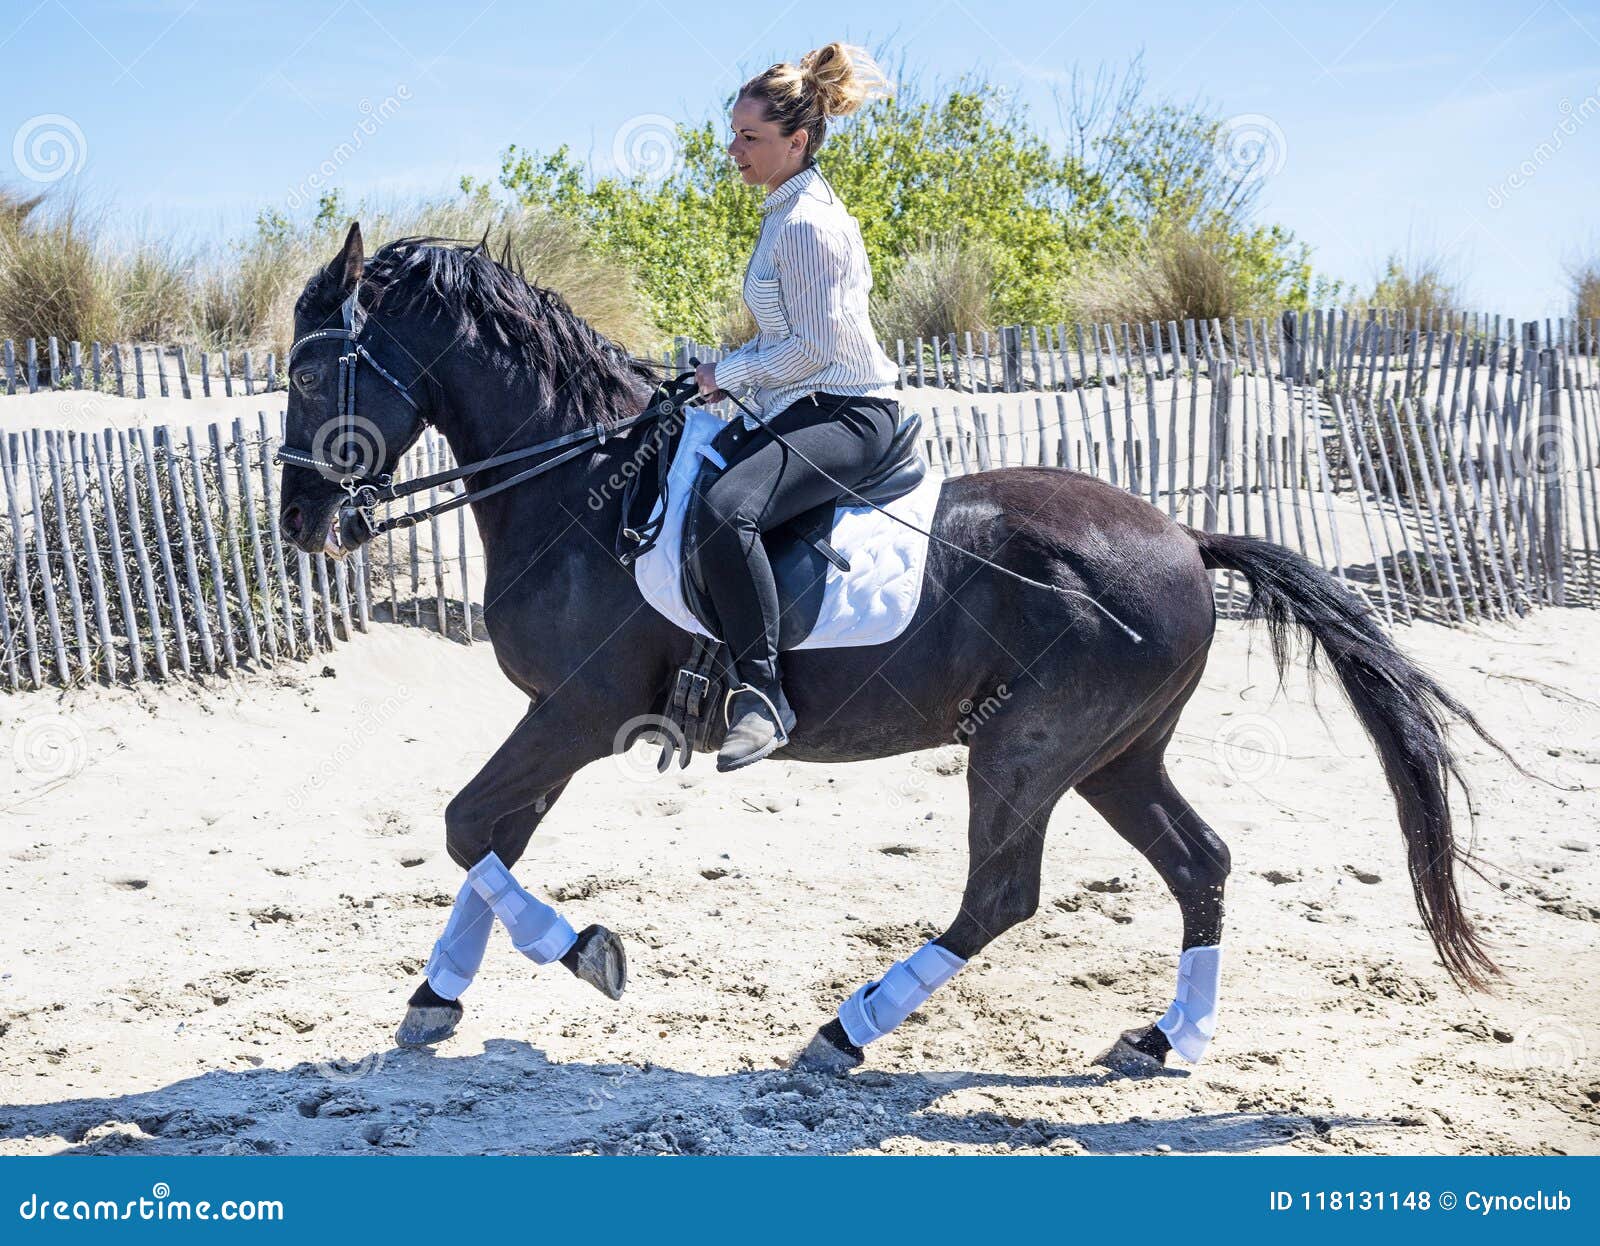 Riding girl on the beach stock photo. Image of horse - 118131148